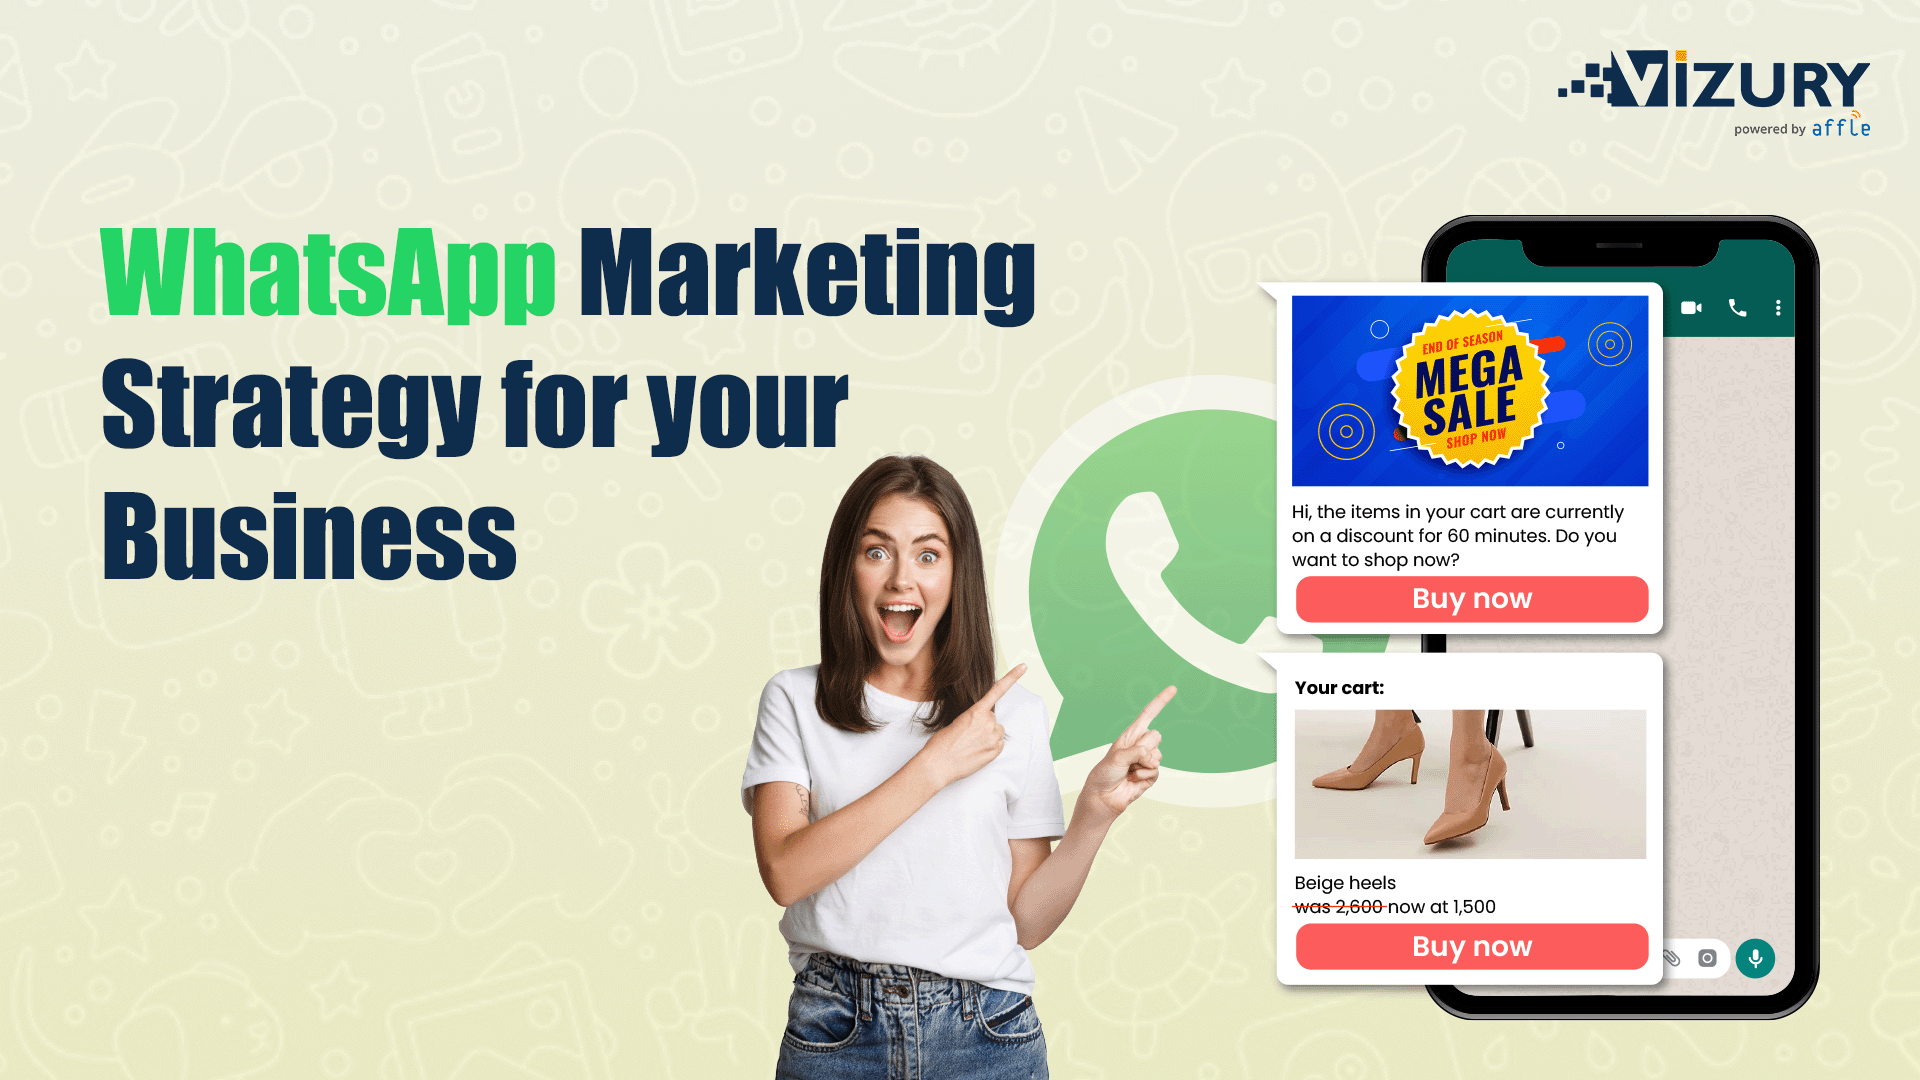 WhatsApp Marketing Strategies for your Business